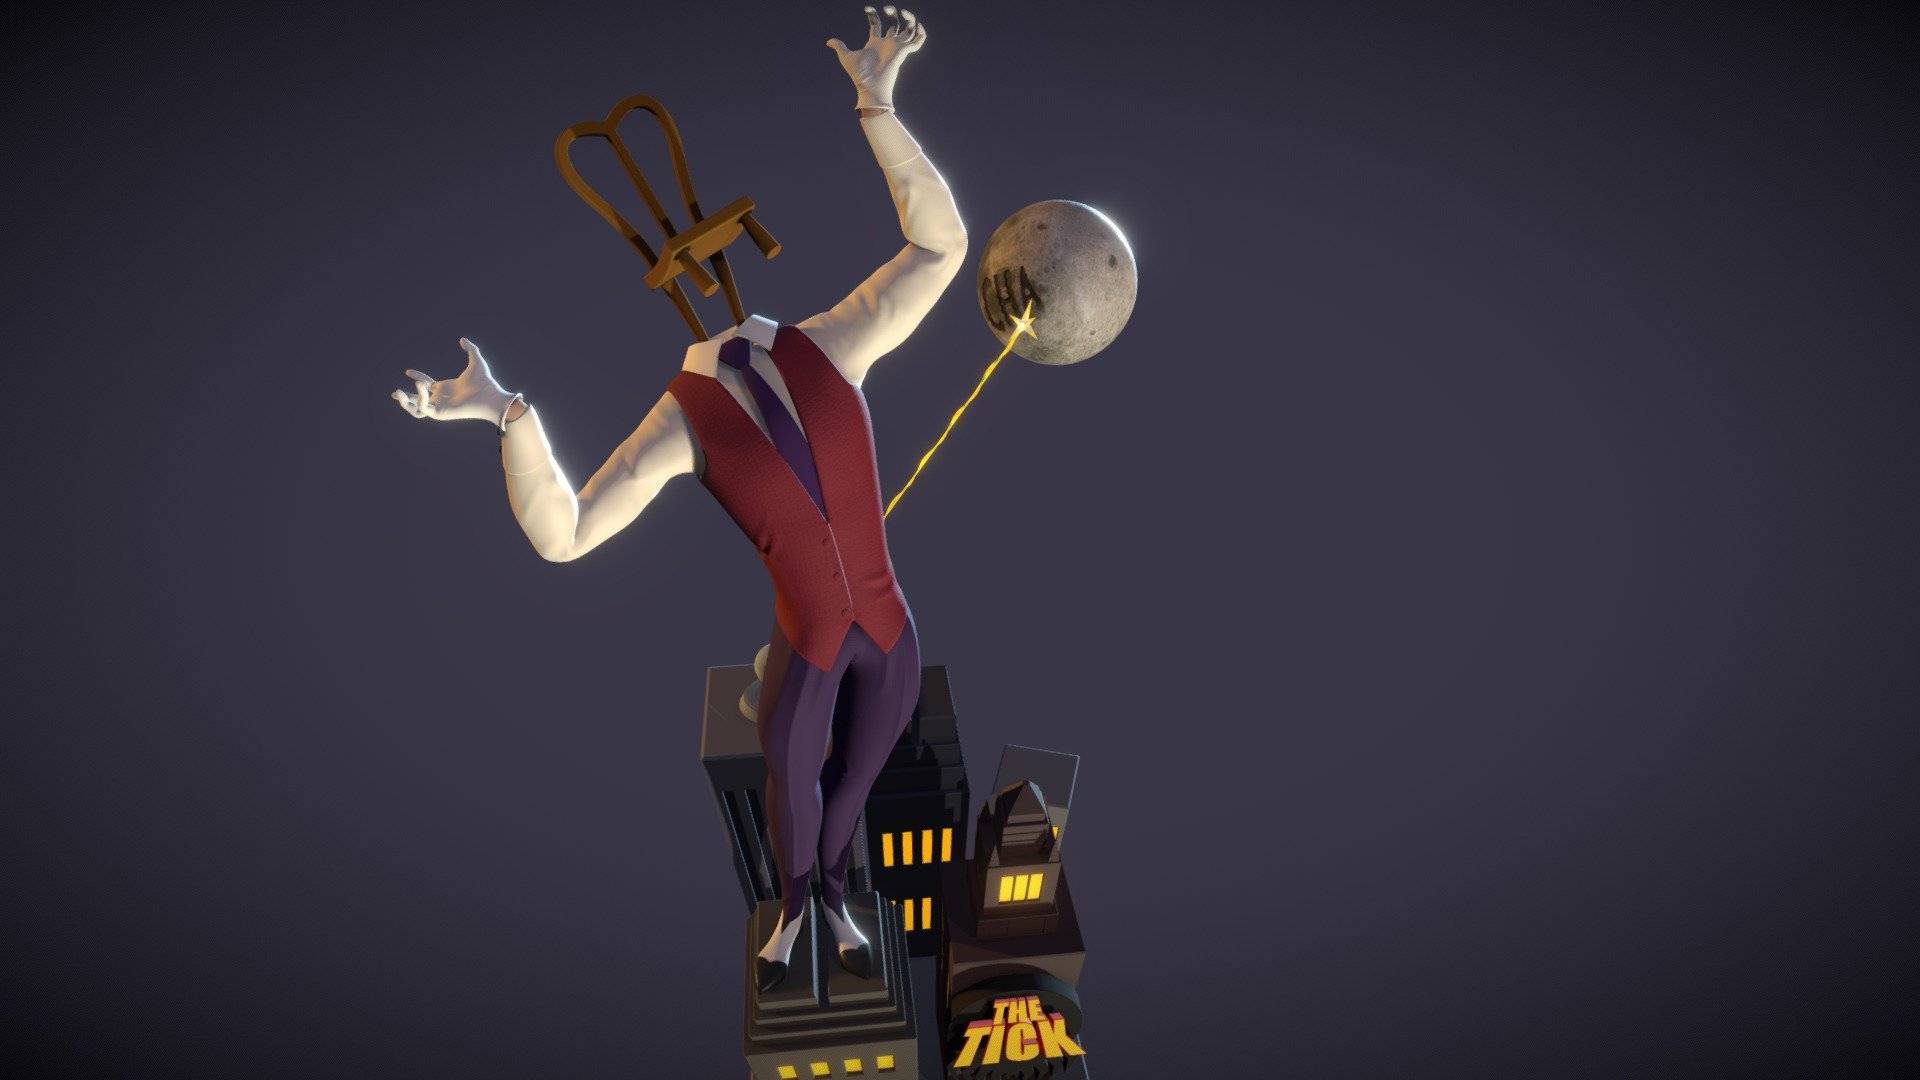 Can't have a Tick character collection without Chairface Chippendale! - Chairface Chippendale - Buy Royalty Free 3D model by Brad Groatman (@groatman) 3d model